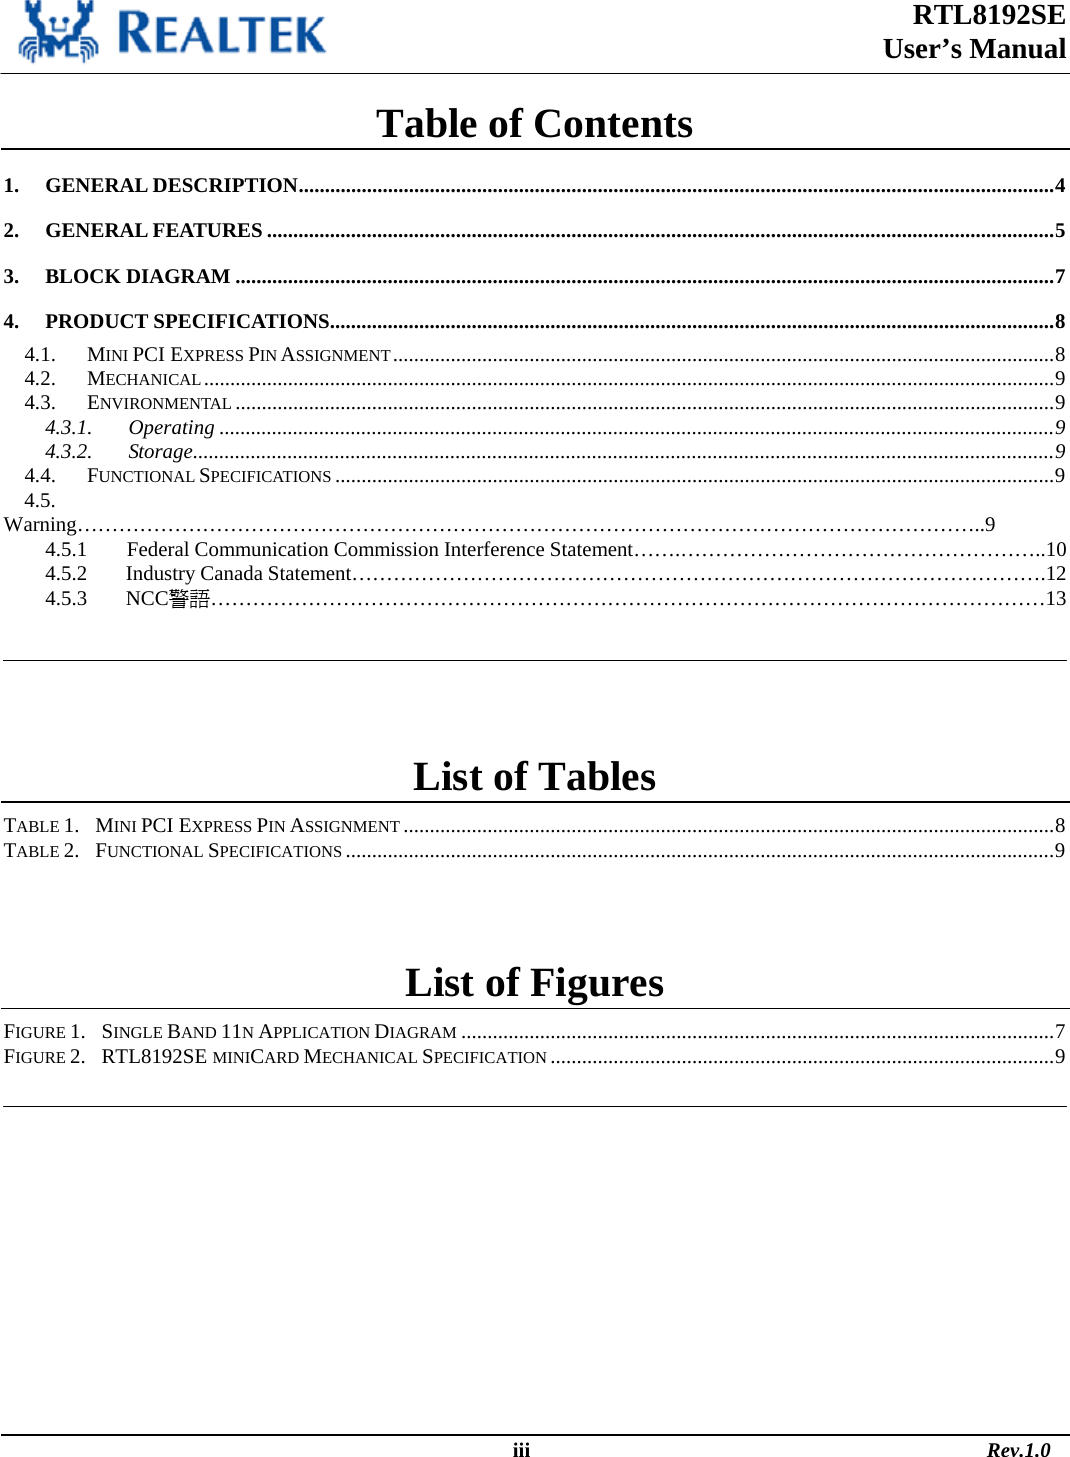 RTL8192SE  User’s Manual                                                                                                  iii                                                                                       Rev.1.0  Table of Contents 1. GENERAL DESCRIPTION................................................................................................................................................4 2. GENERAL FEATURES ......................................................................................................................................................5 3. BLOCK DIAGRAM ............................................................................................................................................................7 4. PRODUCT SPECIFICATIONS..........................................................................................................................................8 4.1. MINI PCI EXPRESS PIN ASSIGNMENT..............................................................................................................................8 4.2. MECHANICAL..................................................................................................................................................................9 4.3. ENVIRONMENTAL ............................................................................................................................................................9 4.3.1. Operating ...............................................................................................................................................................9 4.3.2. Storage....................................................................................................................................................................9 4.4. FUNCTIONAL SPECIFICATIONS .........................................................................................................................................9 4.5.      Warning…………………………………………………………………………………………………………………..9     4.5.1        Federal Communication Commission Interference Statement…….……………………………………………..10     4.5.2        Industry Canada Statement……………………………………………………………………………………….12     4.5.3        NCC警語…………………………………………………………………………………………………………13    List of Tables TABLE 1.   MINI PCI EXPRESS PIN ASSIGNMENT ............................................................................................................................8 TABLE 2.   FUNCTIONAL SPECIFICATIONS .......................................................................................................................................9  List of Figures FIGURE 1.   SINGLE BAND 11N APPLICATION DIAGRAM .................................................................................................................7 FIGURE 2.   RTL8192SE MINICARD MECHANICAL SPECIFICATION ................................................................................................9   